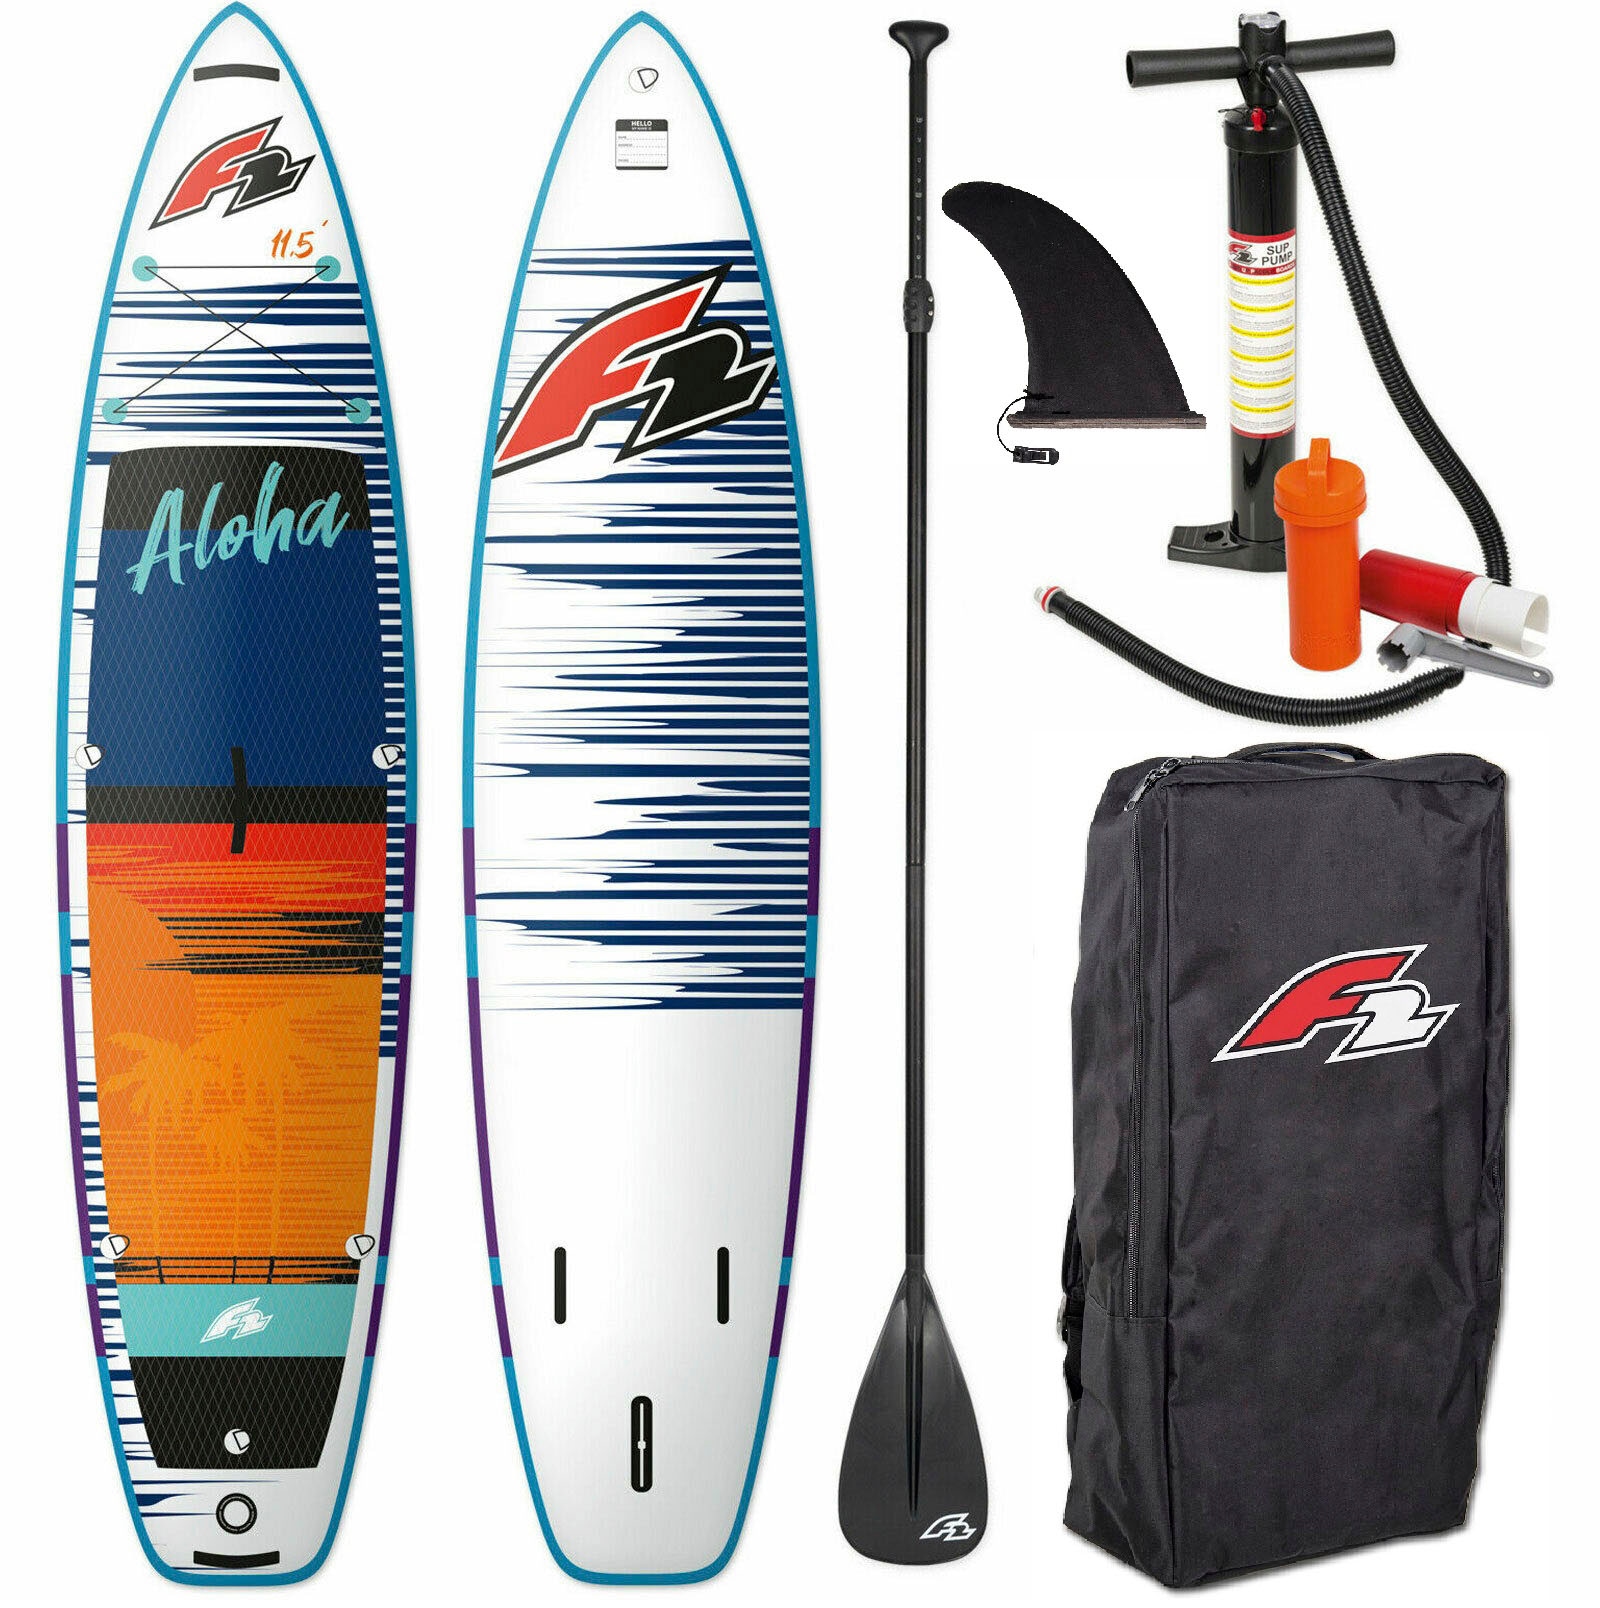 F2 Inflatable 11,4 Online kaufen im OTTO red«, SUP-Board Shop 5 (Packung, »Aloha tlg.)